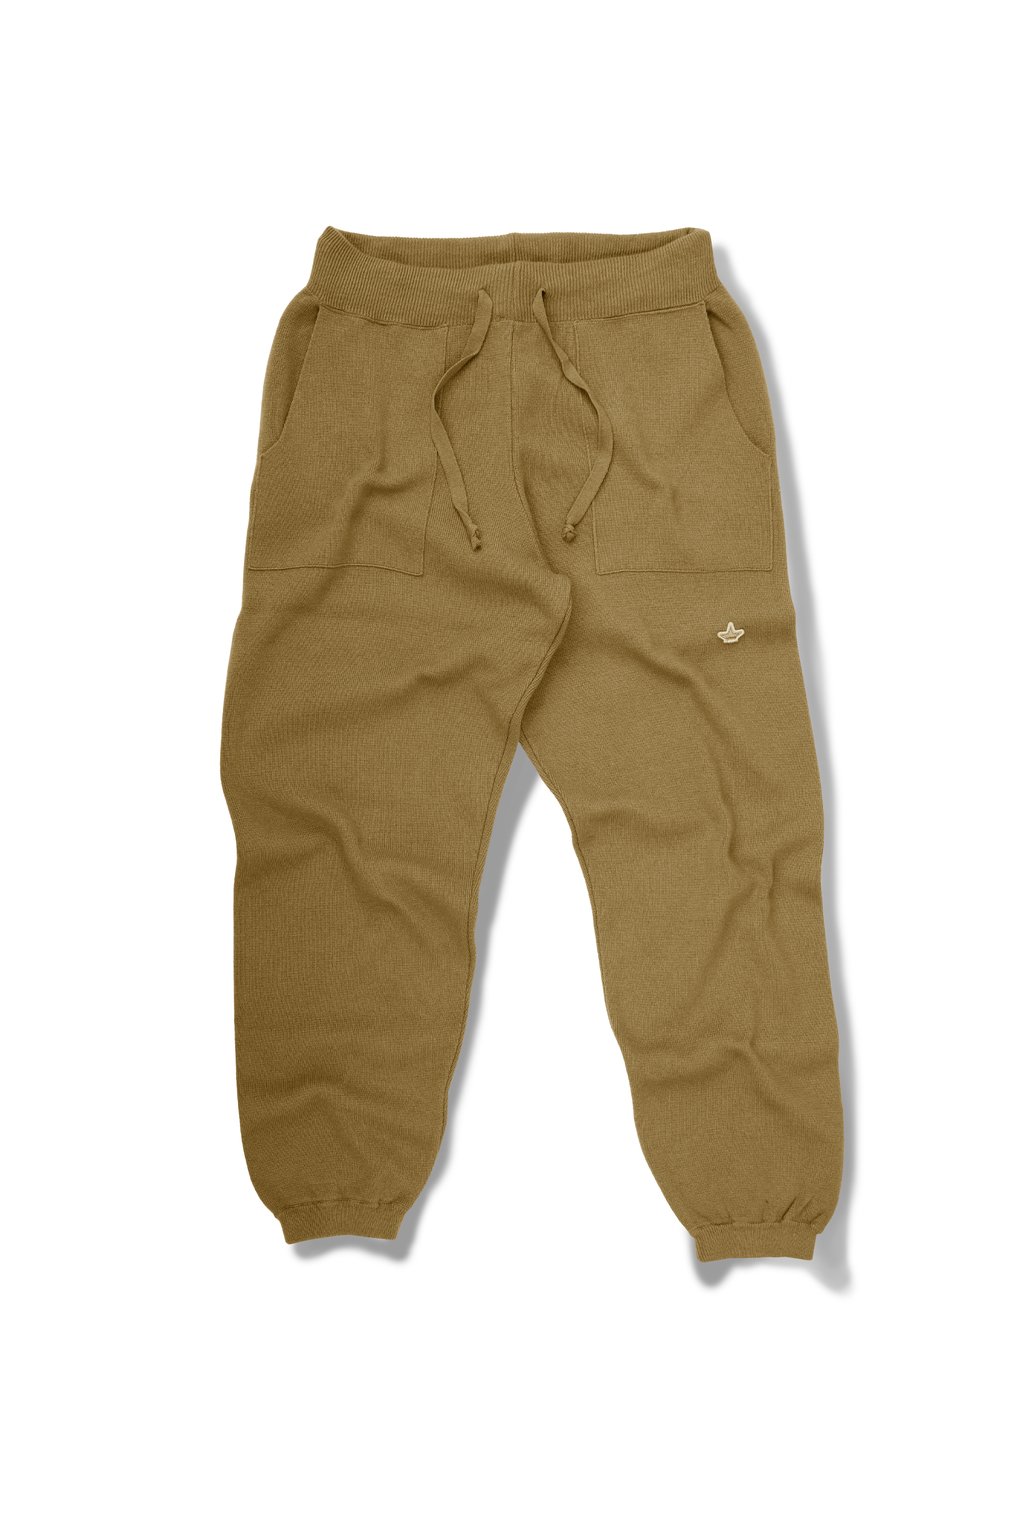 Men's trousers - PM2050TCALN